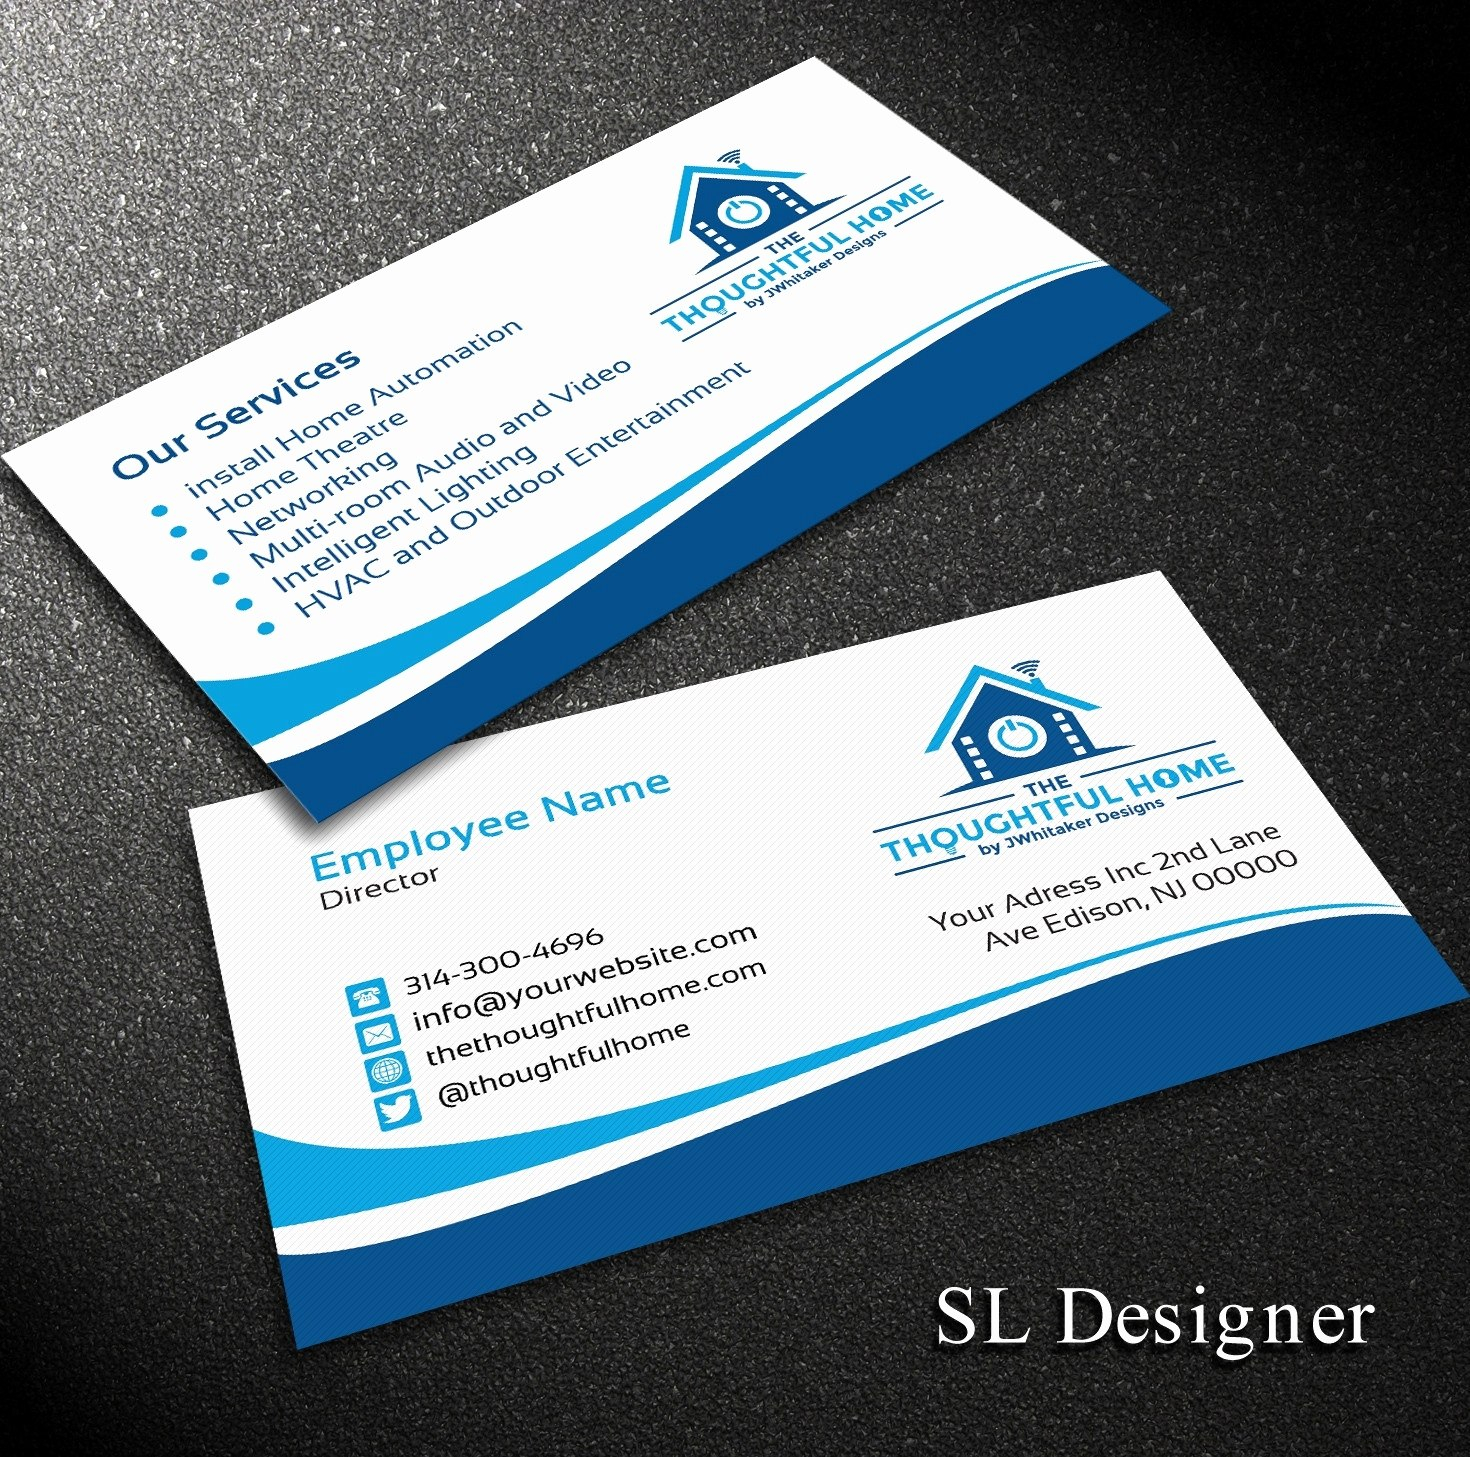 Best Networking Business Cards Best Of Networking Business Card regarding Hvac Business Card Template